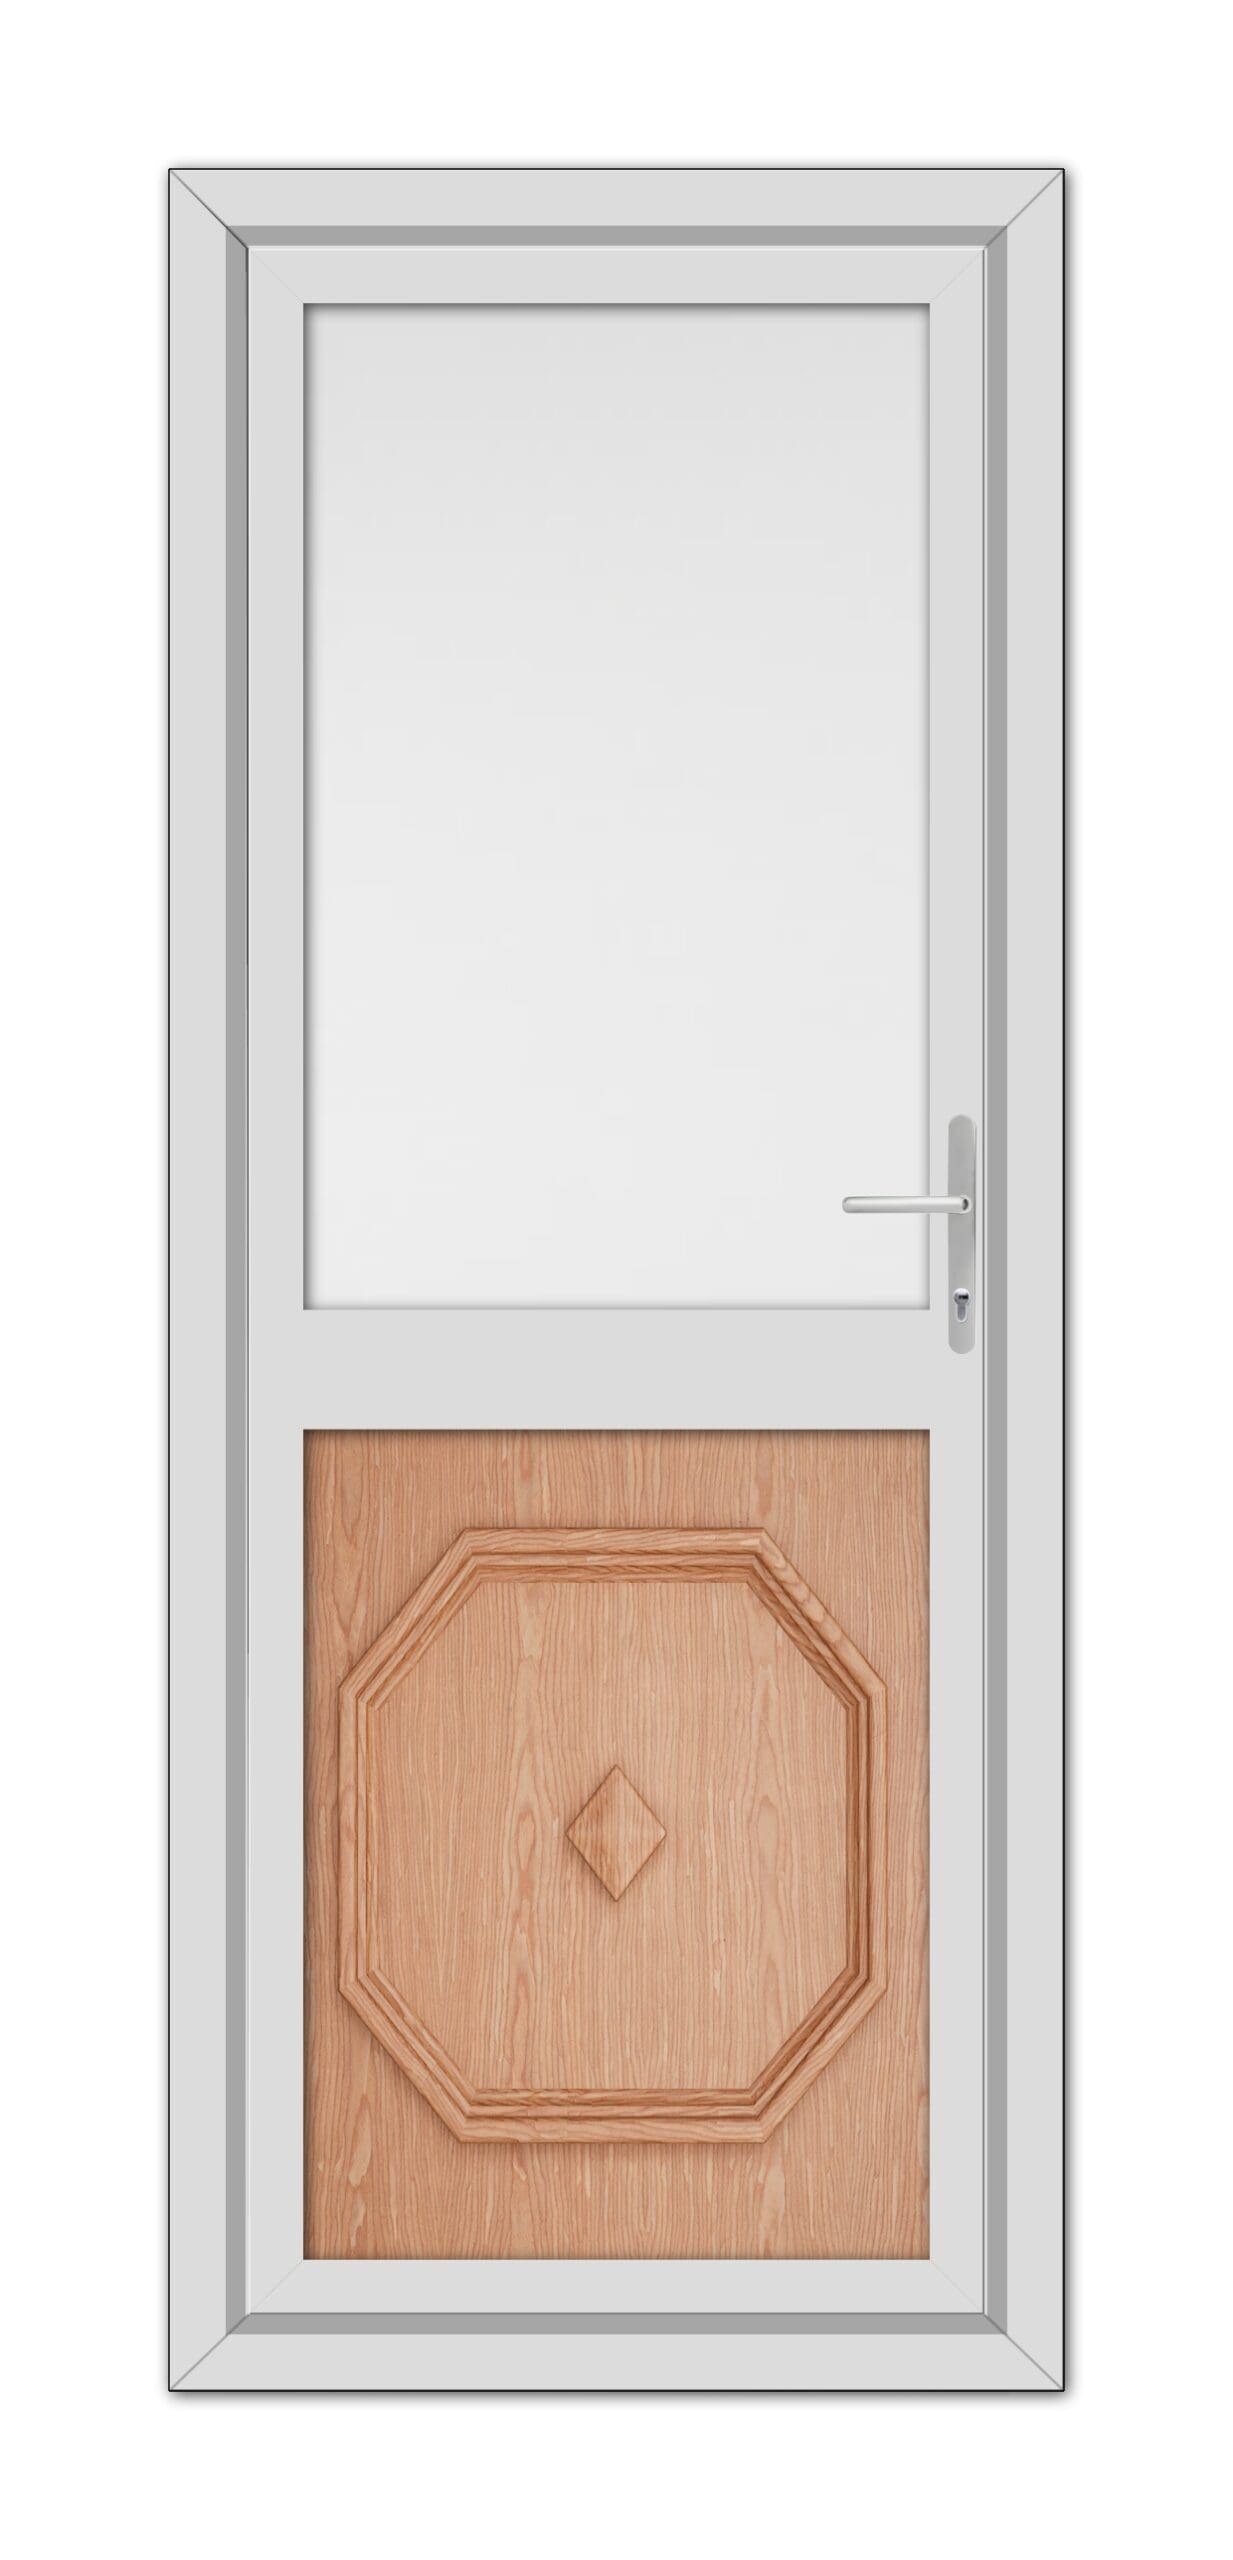 A modern Irish Oak Westminster Half uPVC Back Door featuring a white frame with a large glass window on top and a wooden lower panel with a geometric design, complete with a metal handle.